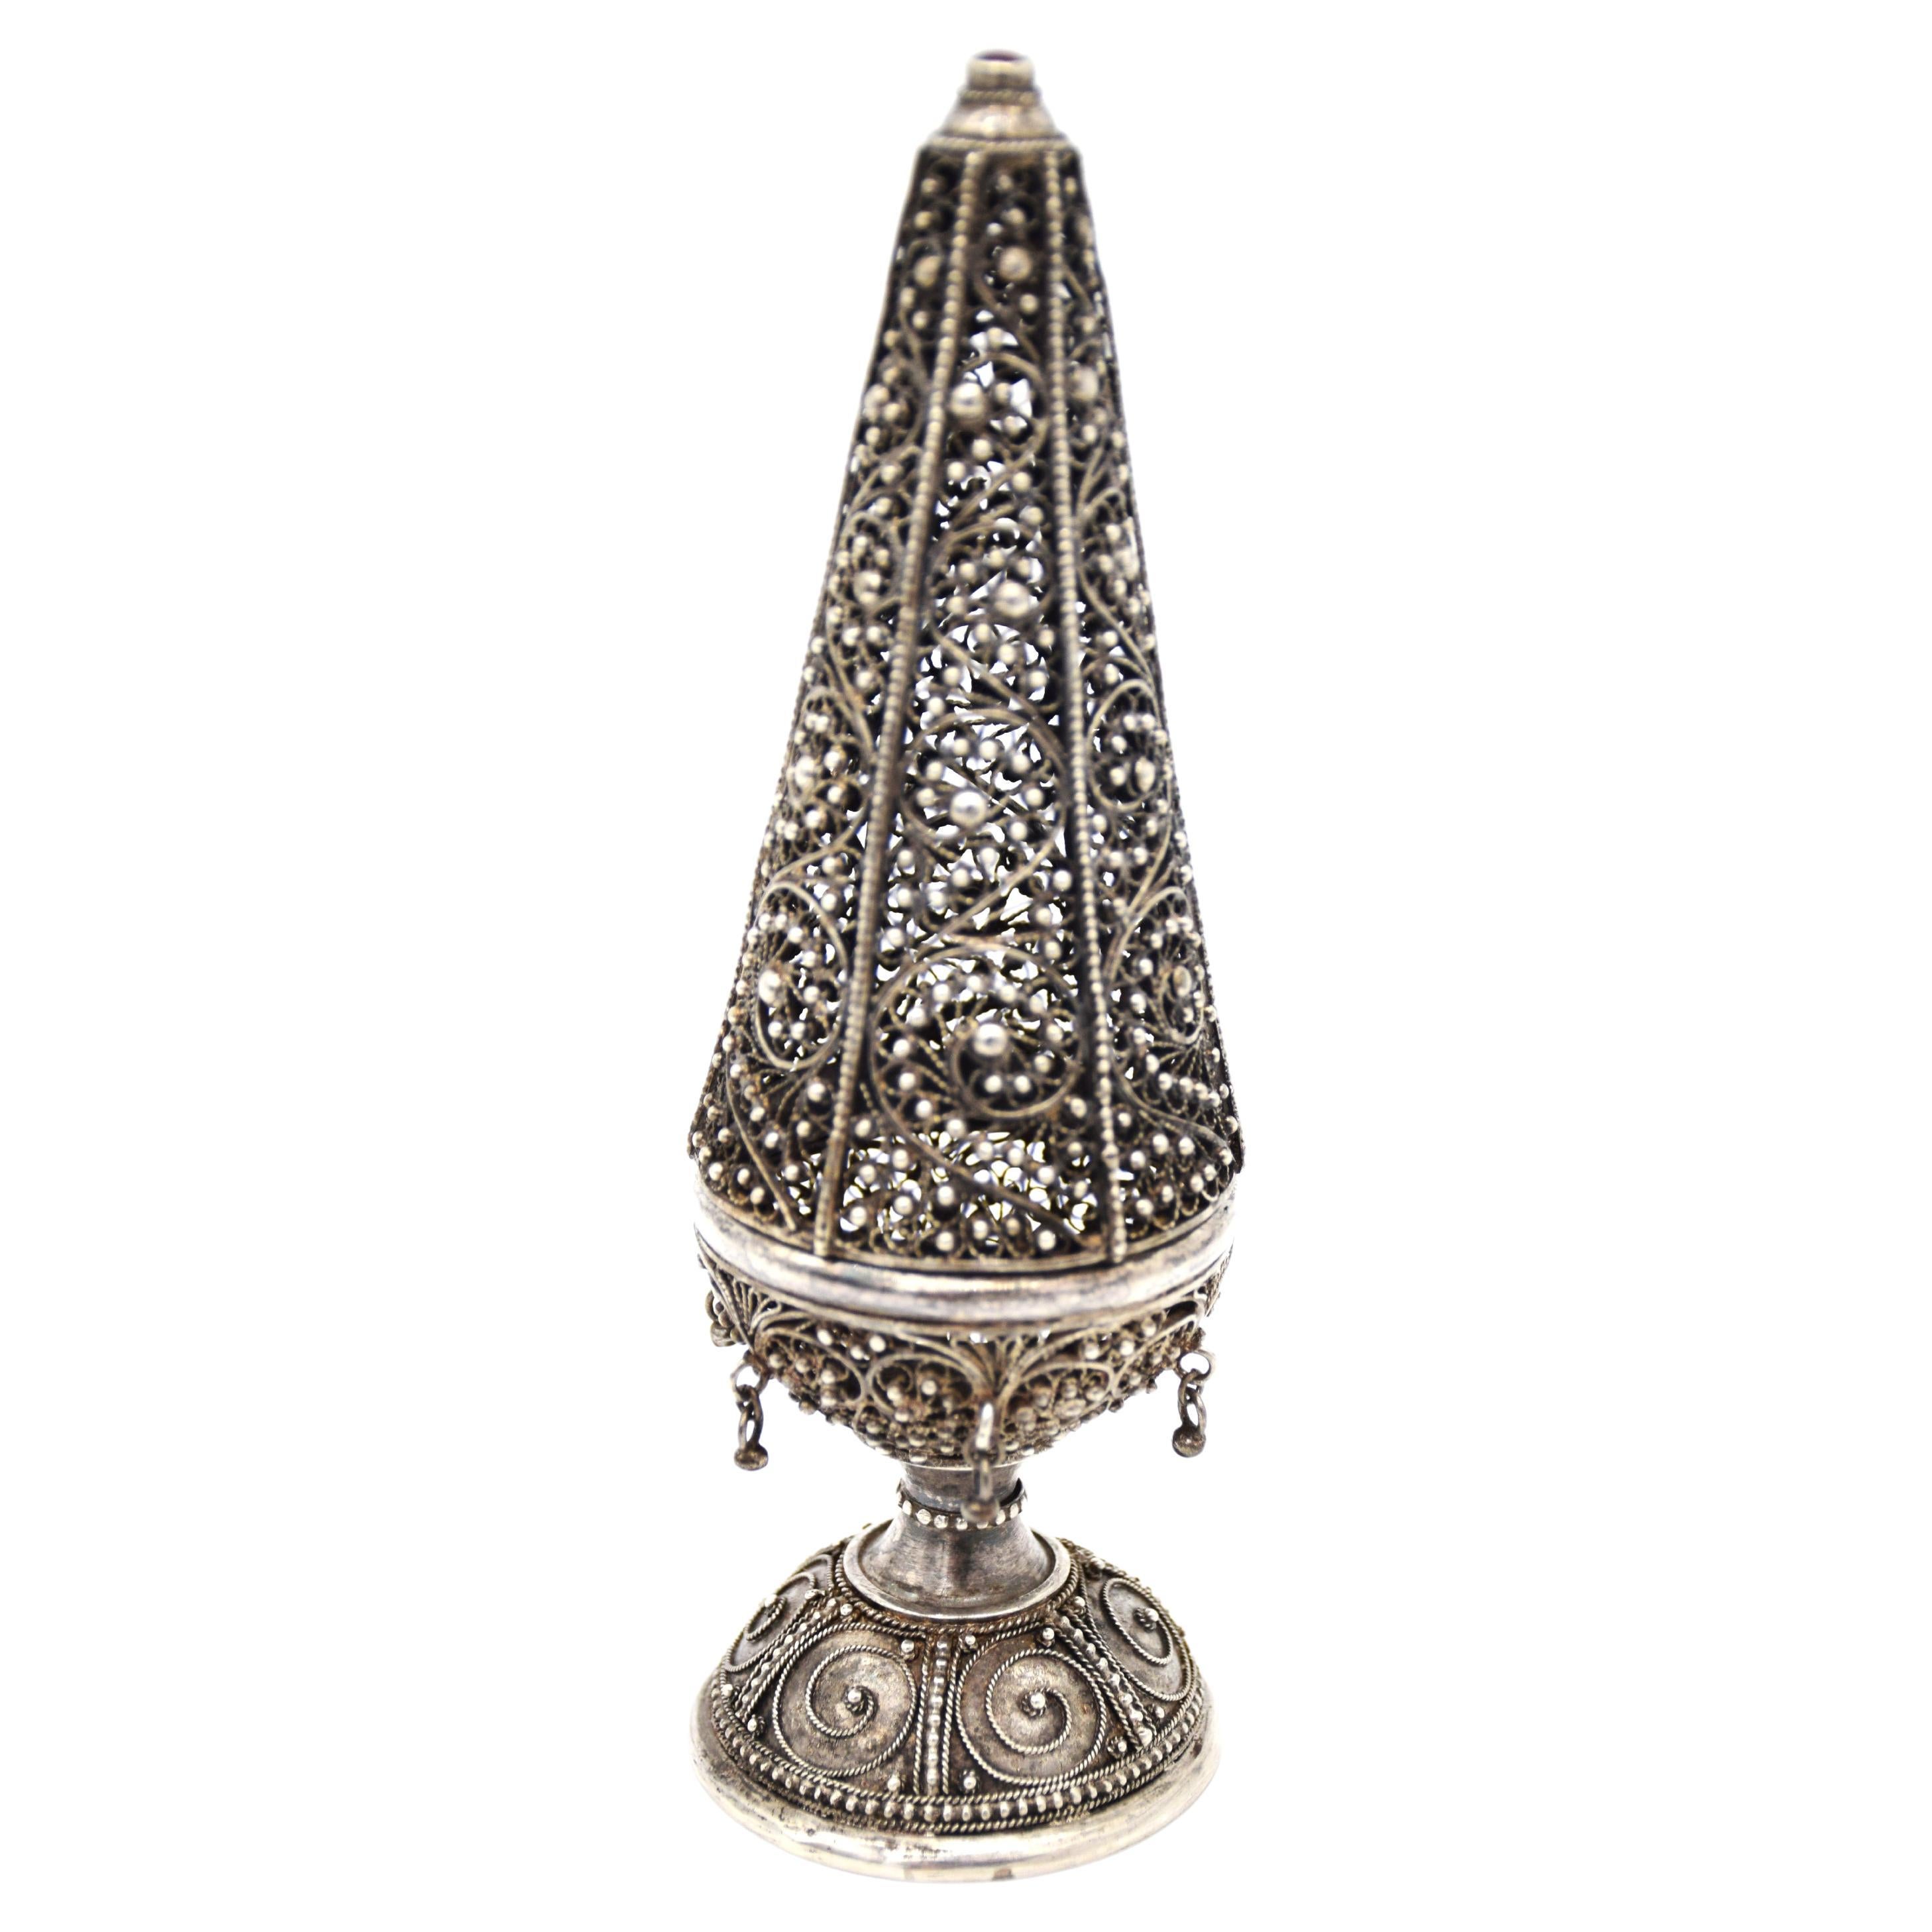 Very rare  Bezalel Jerusalem silver filigree spice tower, this amazing spice Tower was Made by Yehia Yemini, who was the best filigree artist in bezalel, this spice Tower will Date from around 1910-20 , The Havdala ceremony at the conclusion of the